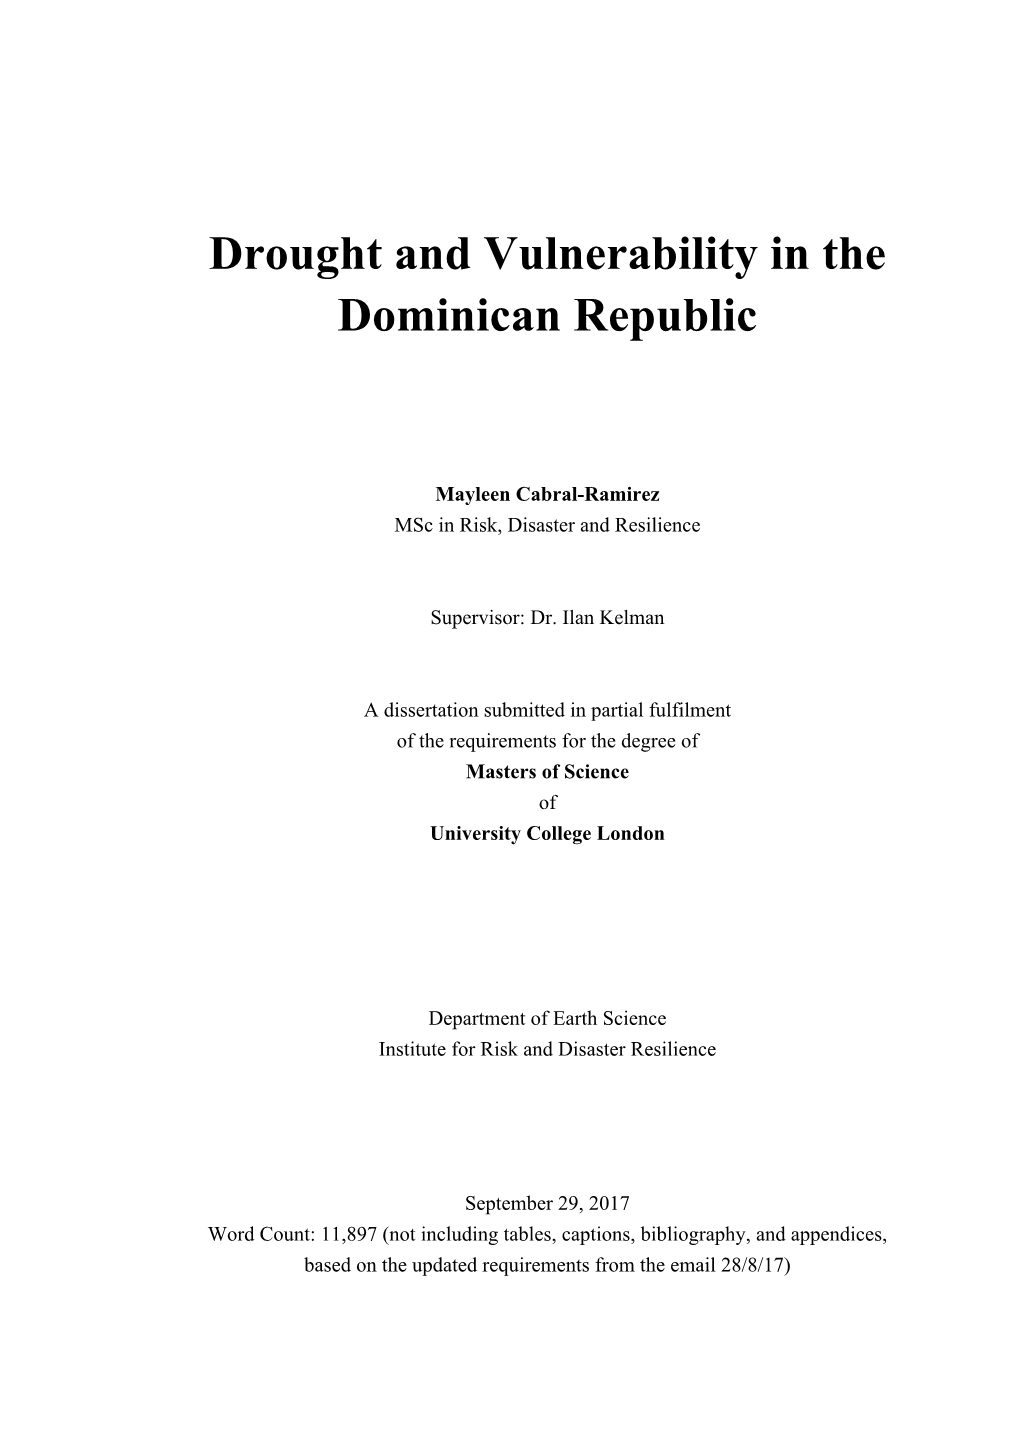 Drought and Vulnerability in the Dominican Republic